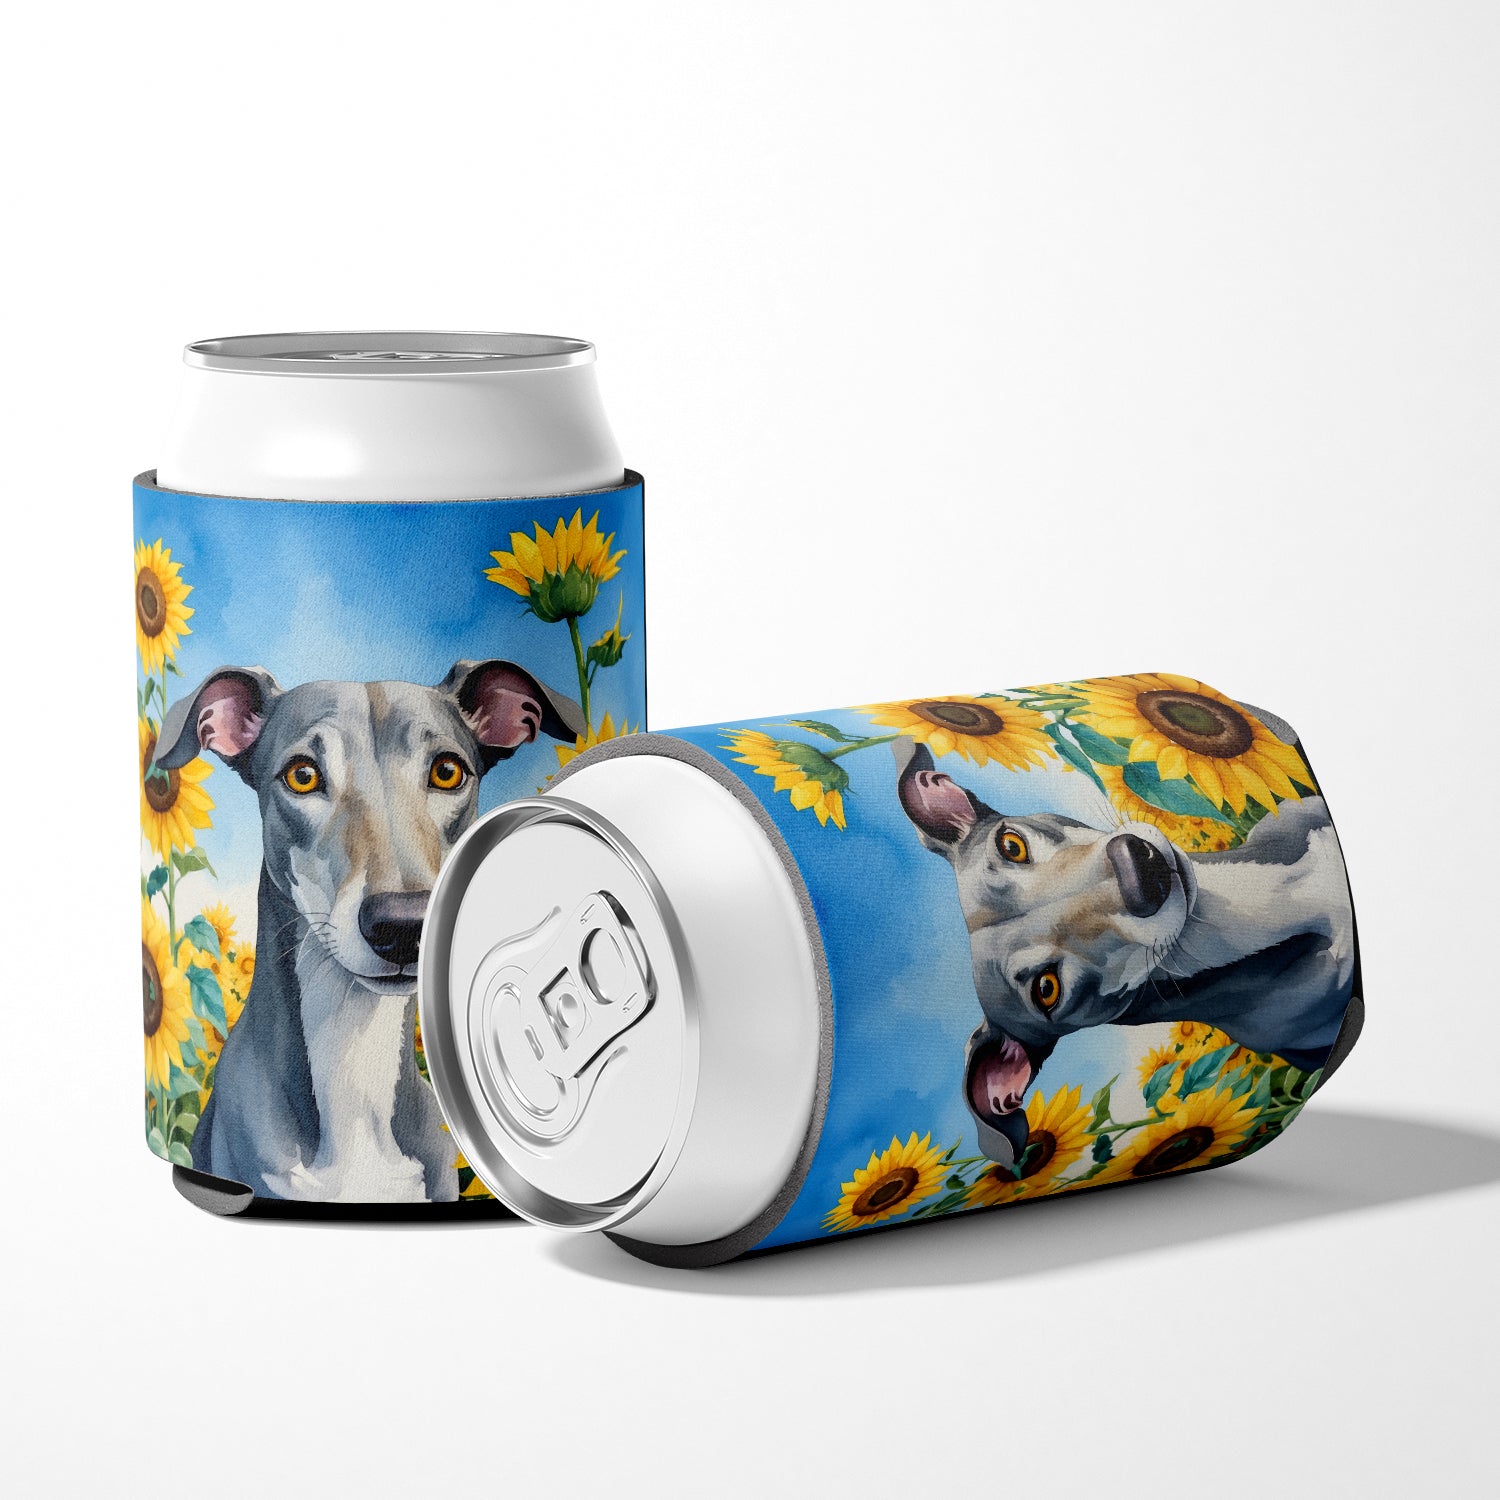 Greyhound in Sunflowers Can or Bottle Hugger